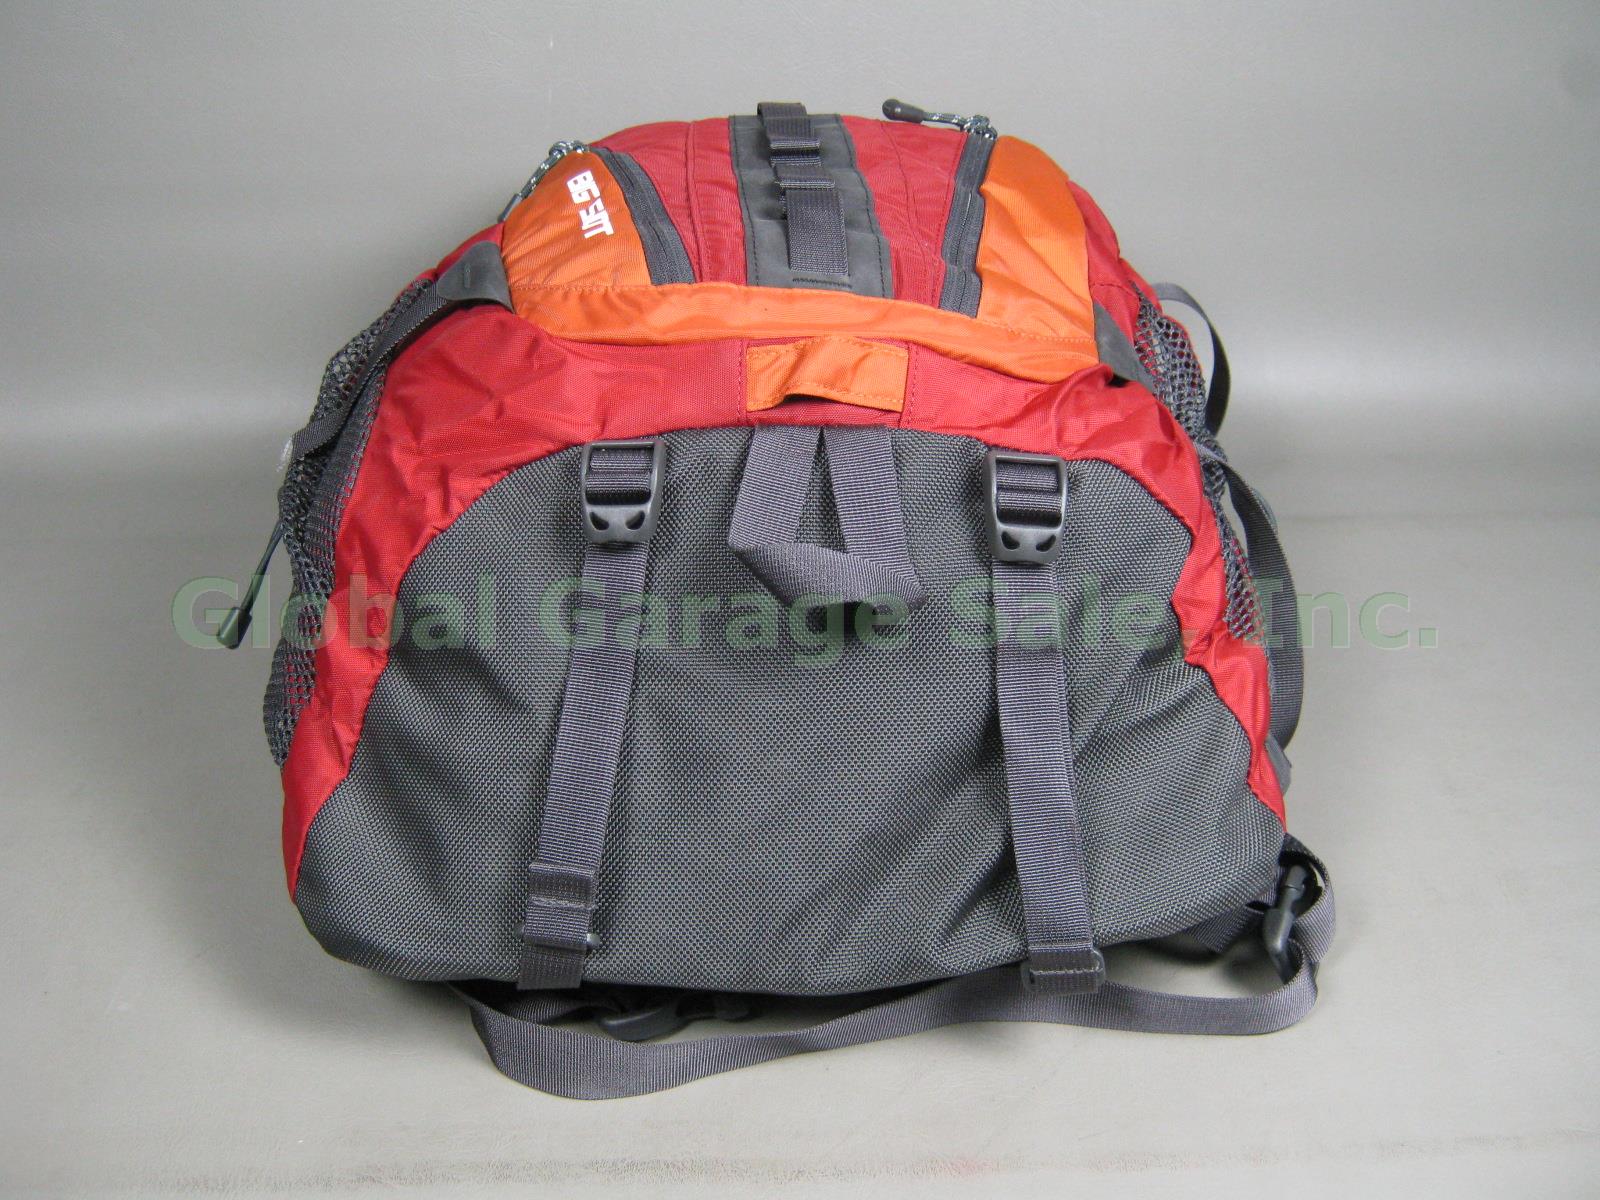 NEW NWT The North Face Big Shot Backpack Day Pack Laptop Book Bag Cardinal Red 4